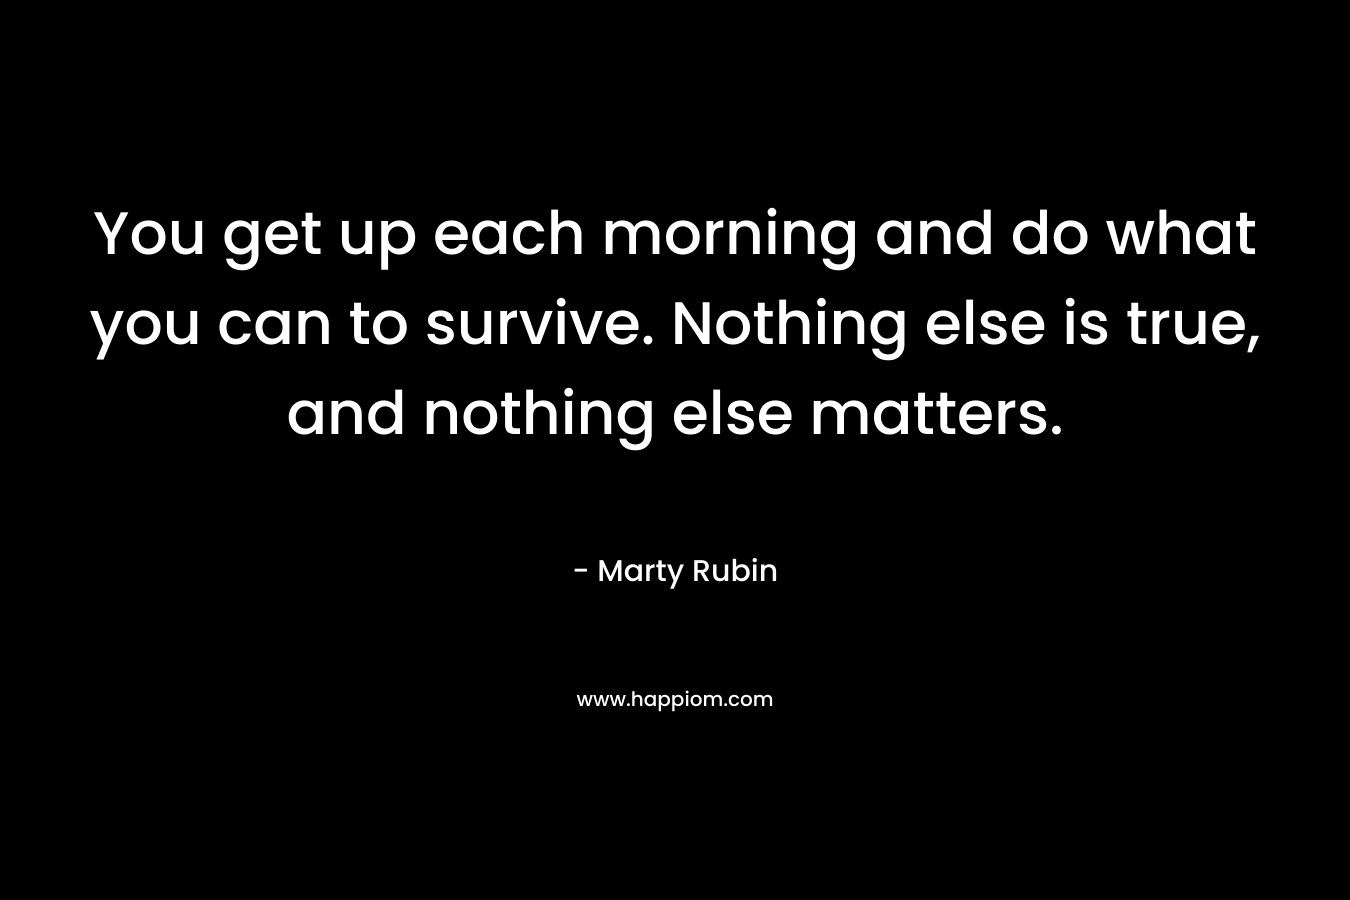 You get up each morning and do what you can to survive. Nothing else is true, and nothing else matters.